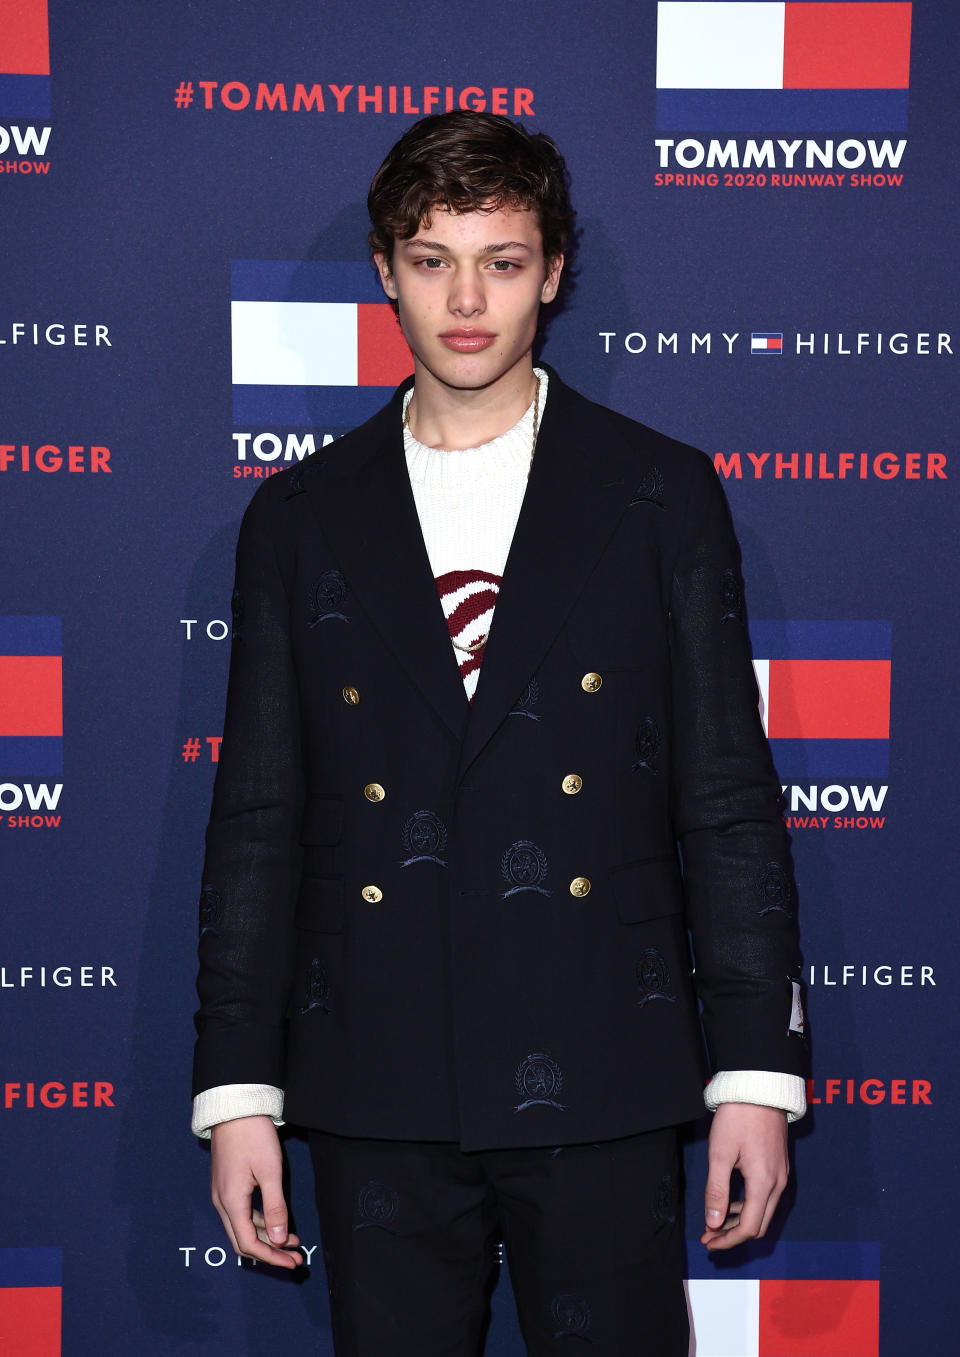 Bobby Brazier attends the TommyNow show during London Fashion Week February 2020 at the Tate Modern on February 16, 2020 in London, England. (Photo by Jeff Spicer/BFC/Getty Images for BFC)